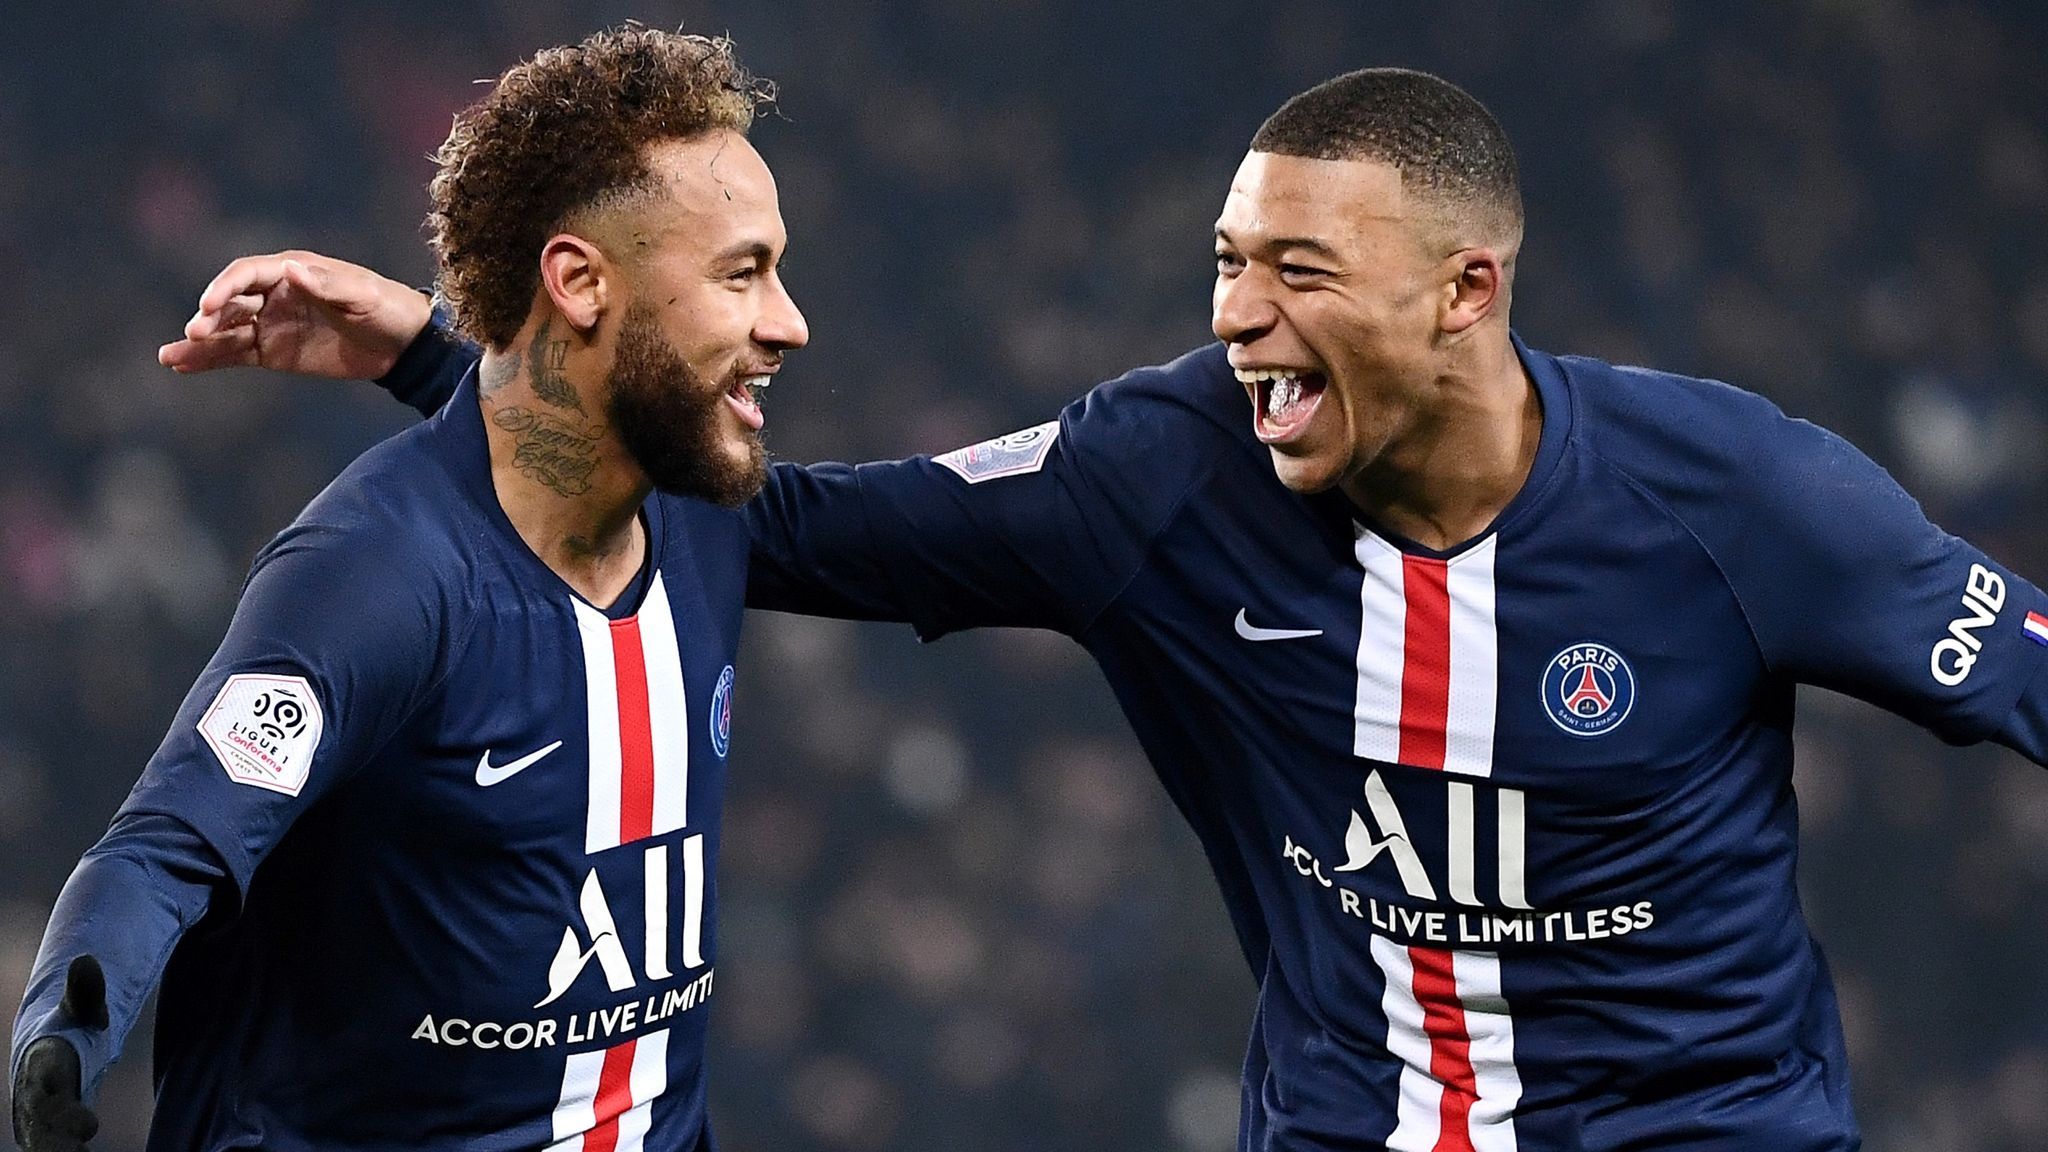 PSG begin contract renewal negotiations with Neymar and Real Madrid target Kylian Mbappé